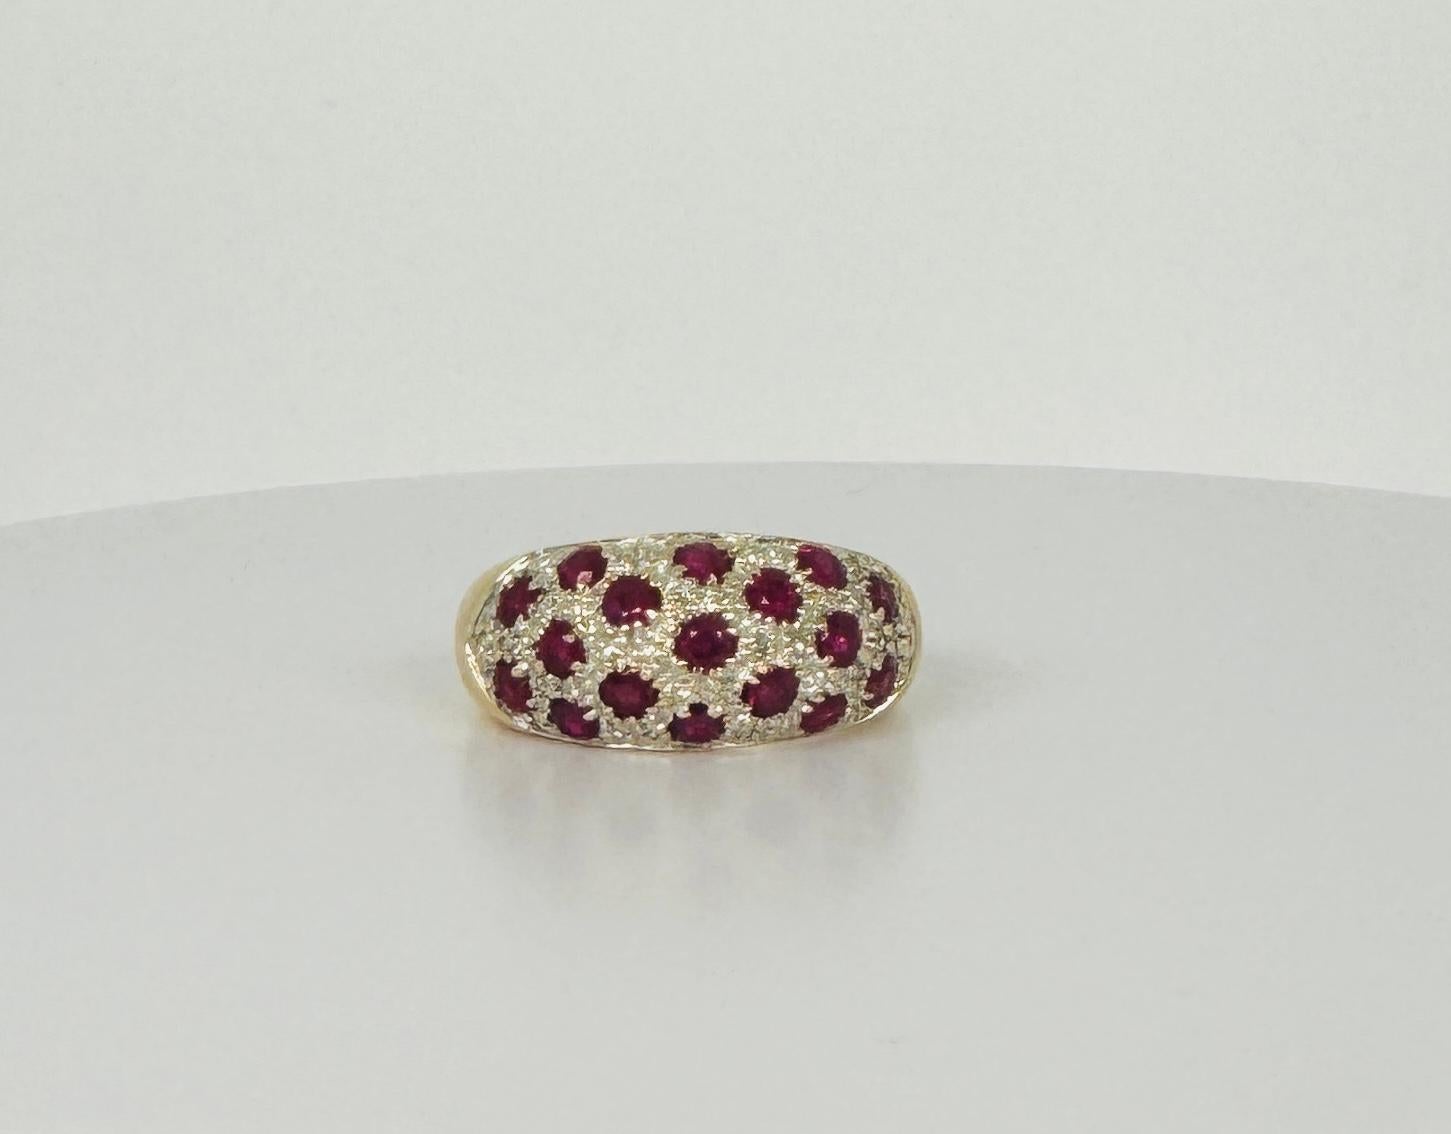 Absolutely breathtaking ring. This second-hand cocktail ring will give you a sophisticated and beyond elegant look.  This gem is made of 18-carat yellow gold. The rubies are truly refined and will certainly sparkle on your finger with all the